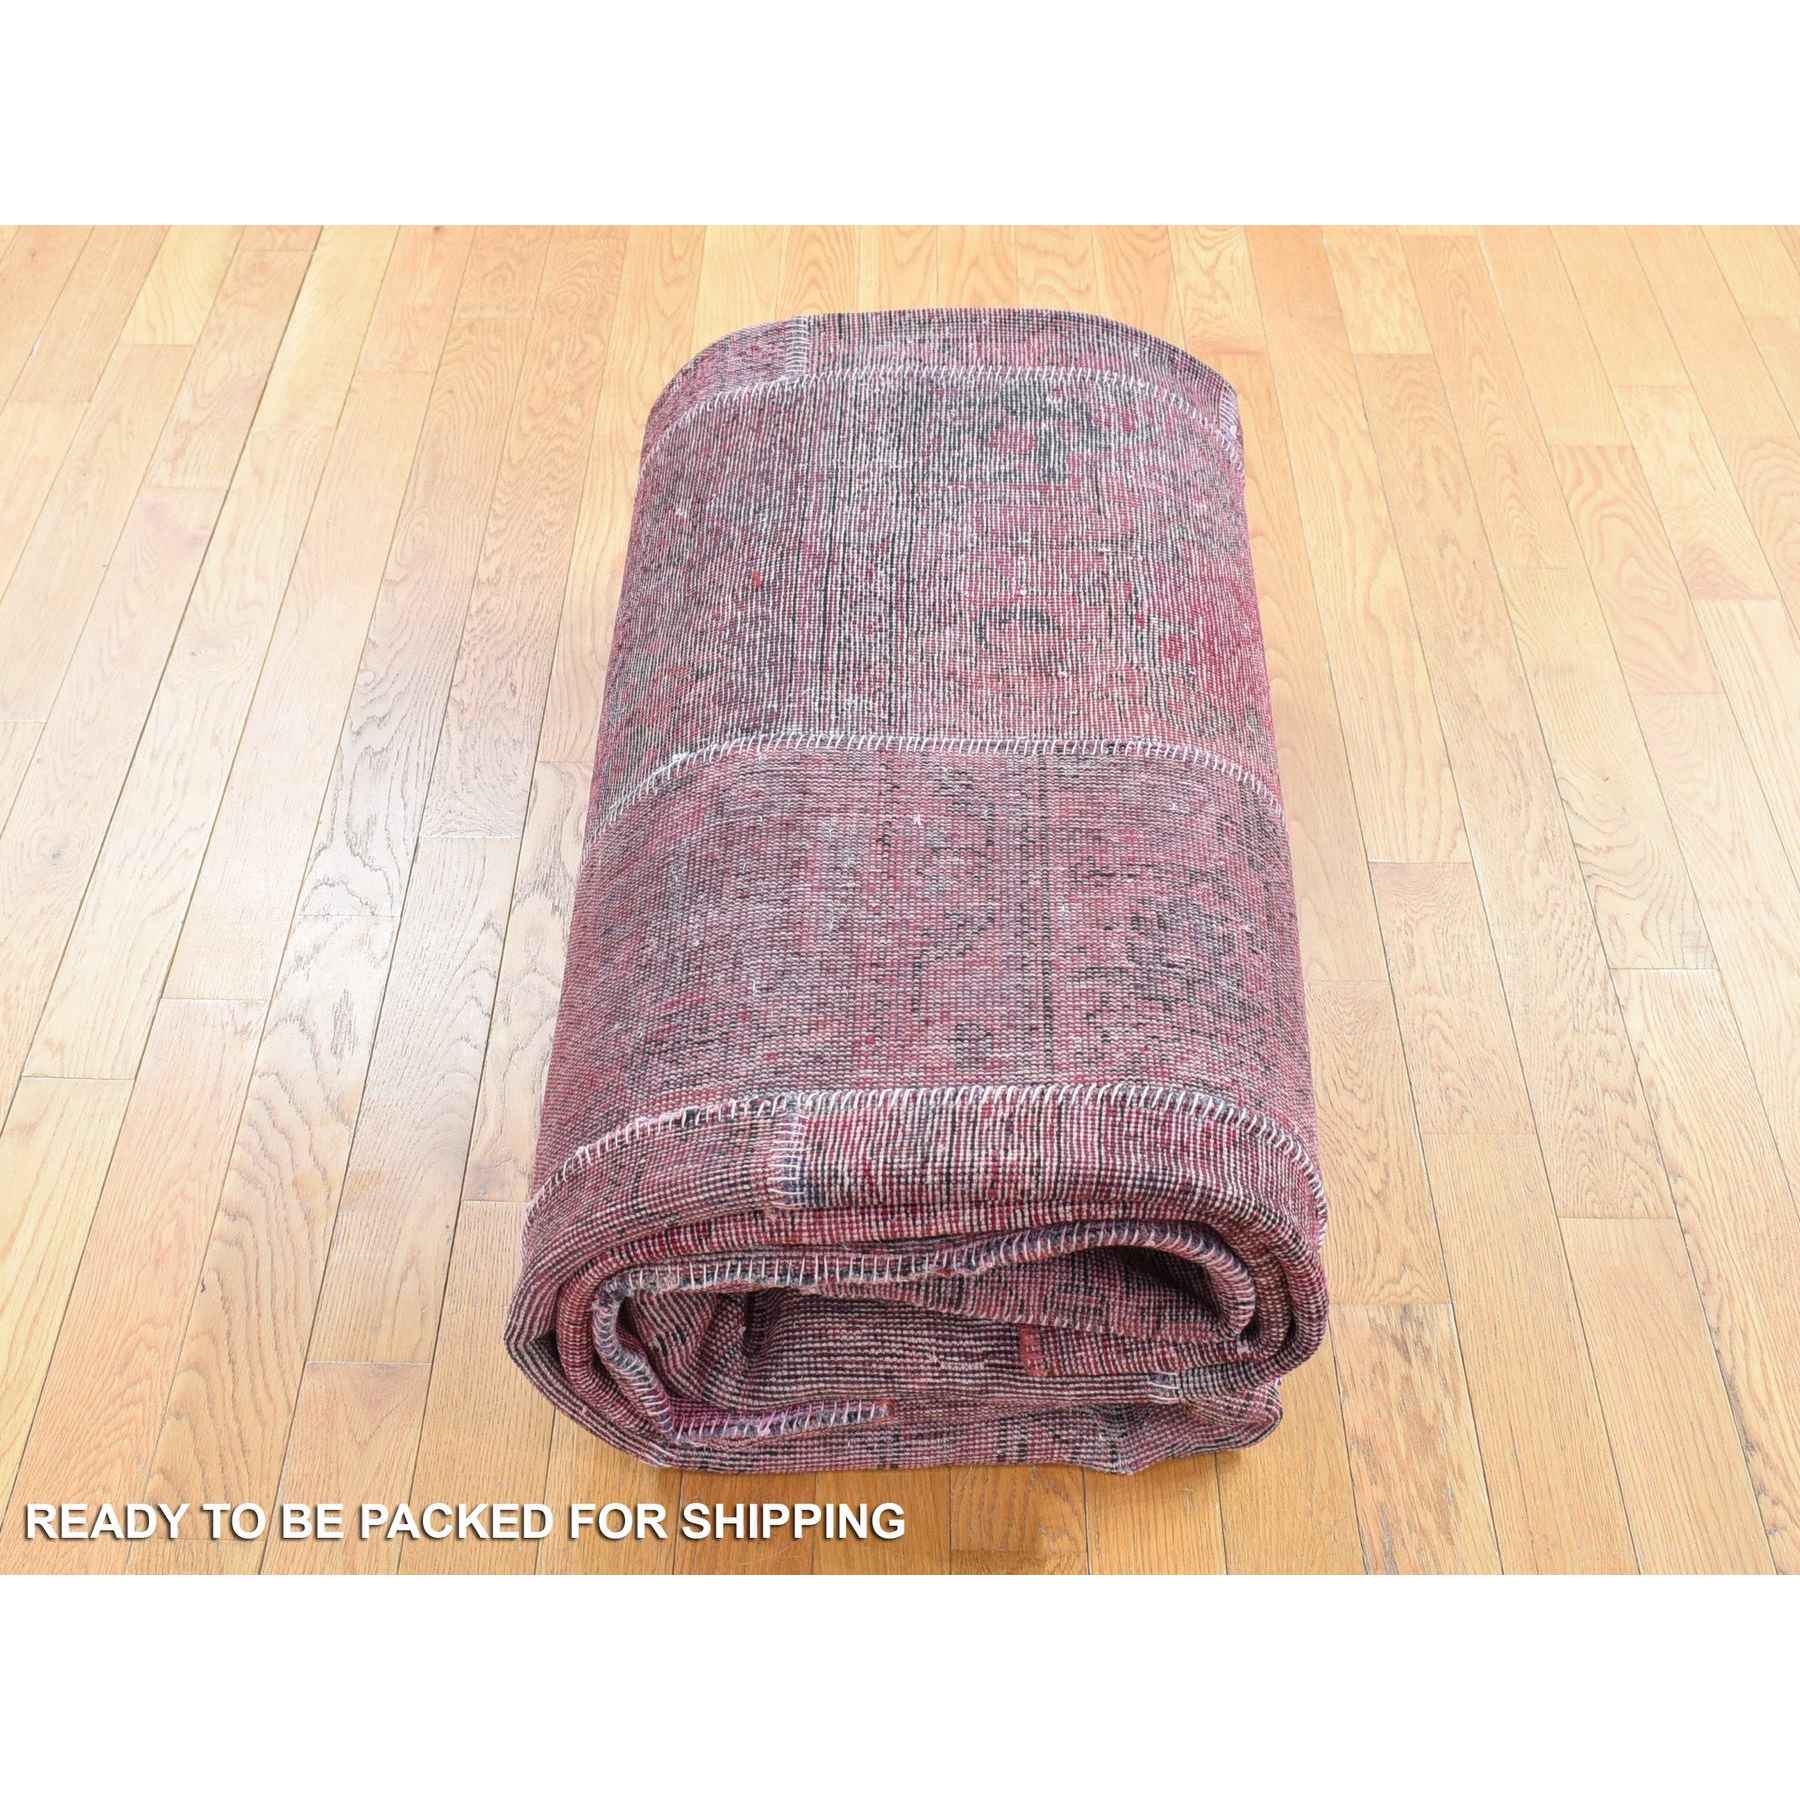 Overdyed-Vintage-Hand-Knotted-Rug-403310